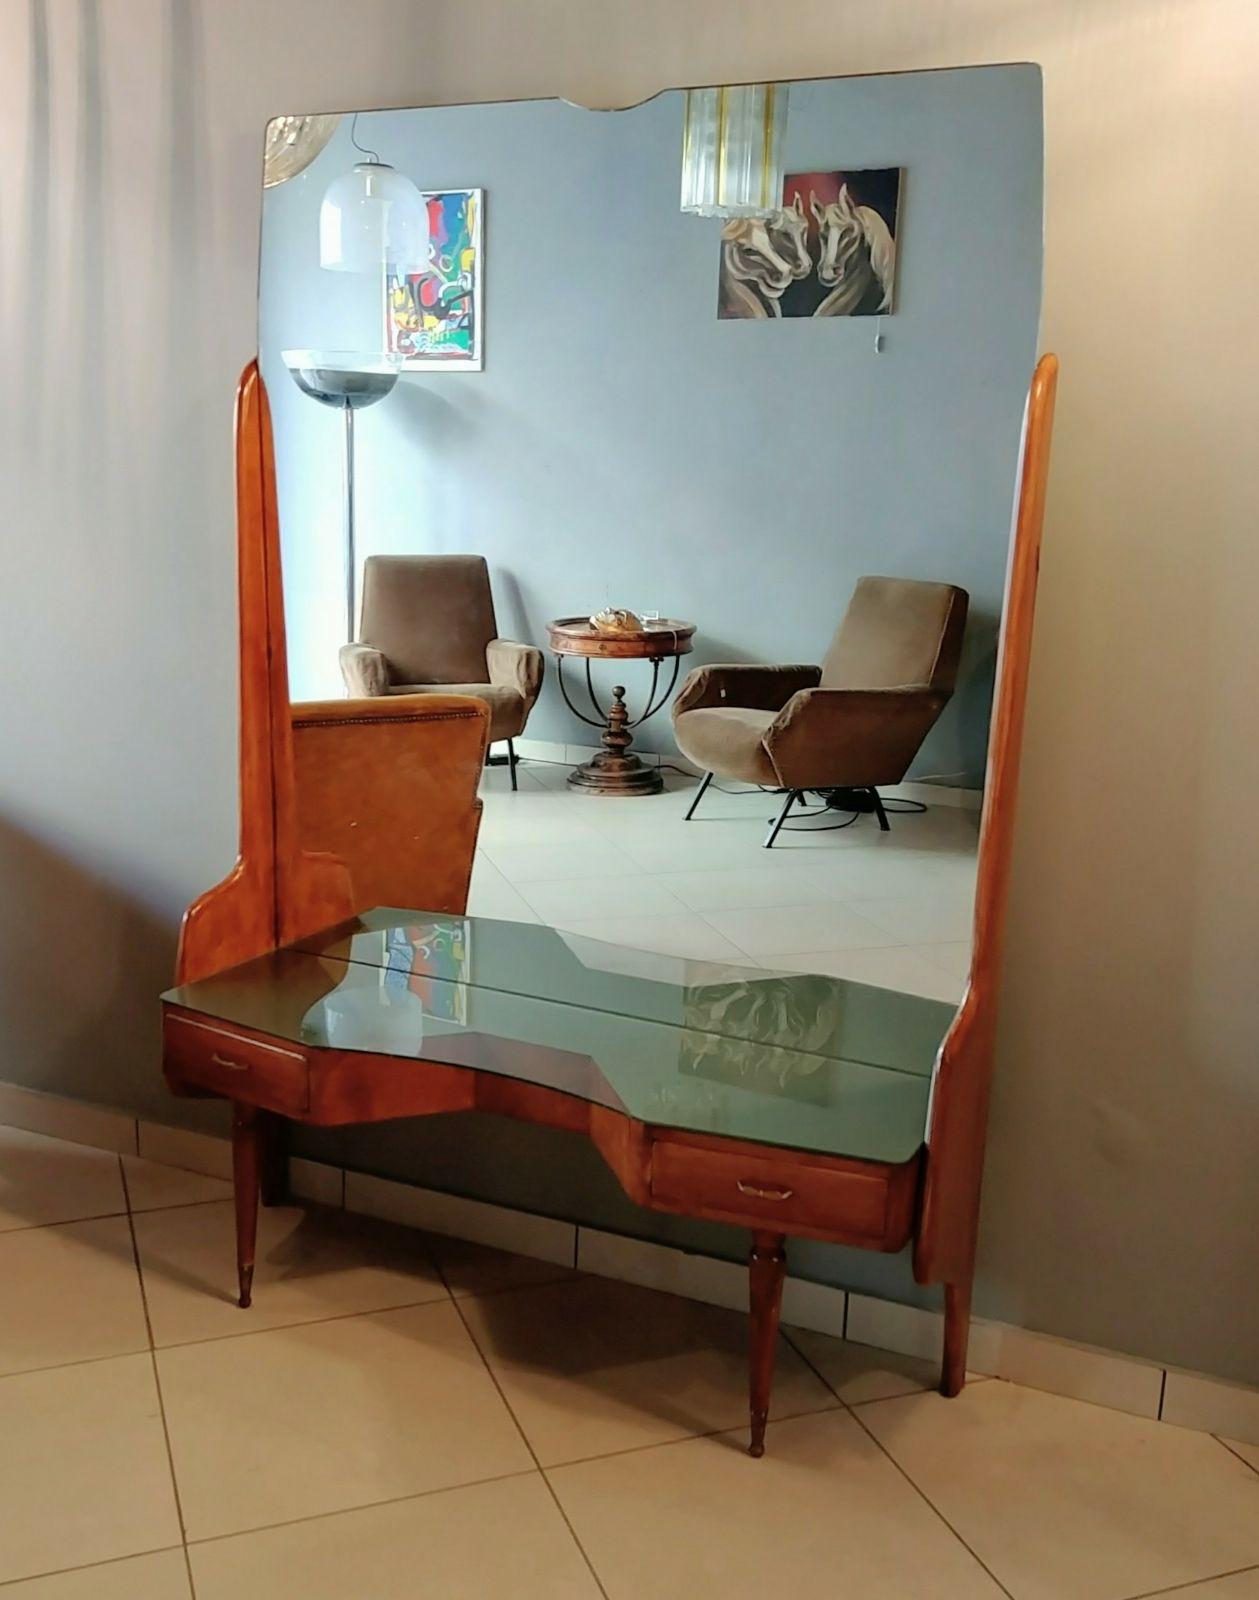 Vittorio Dassi, vanity console table, Italy 1950s
Vanity beauty with original large mirror of the 1950s: very particular shapes and geometries.